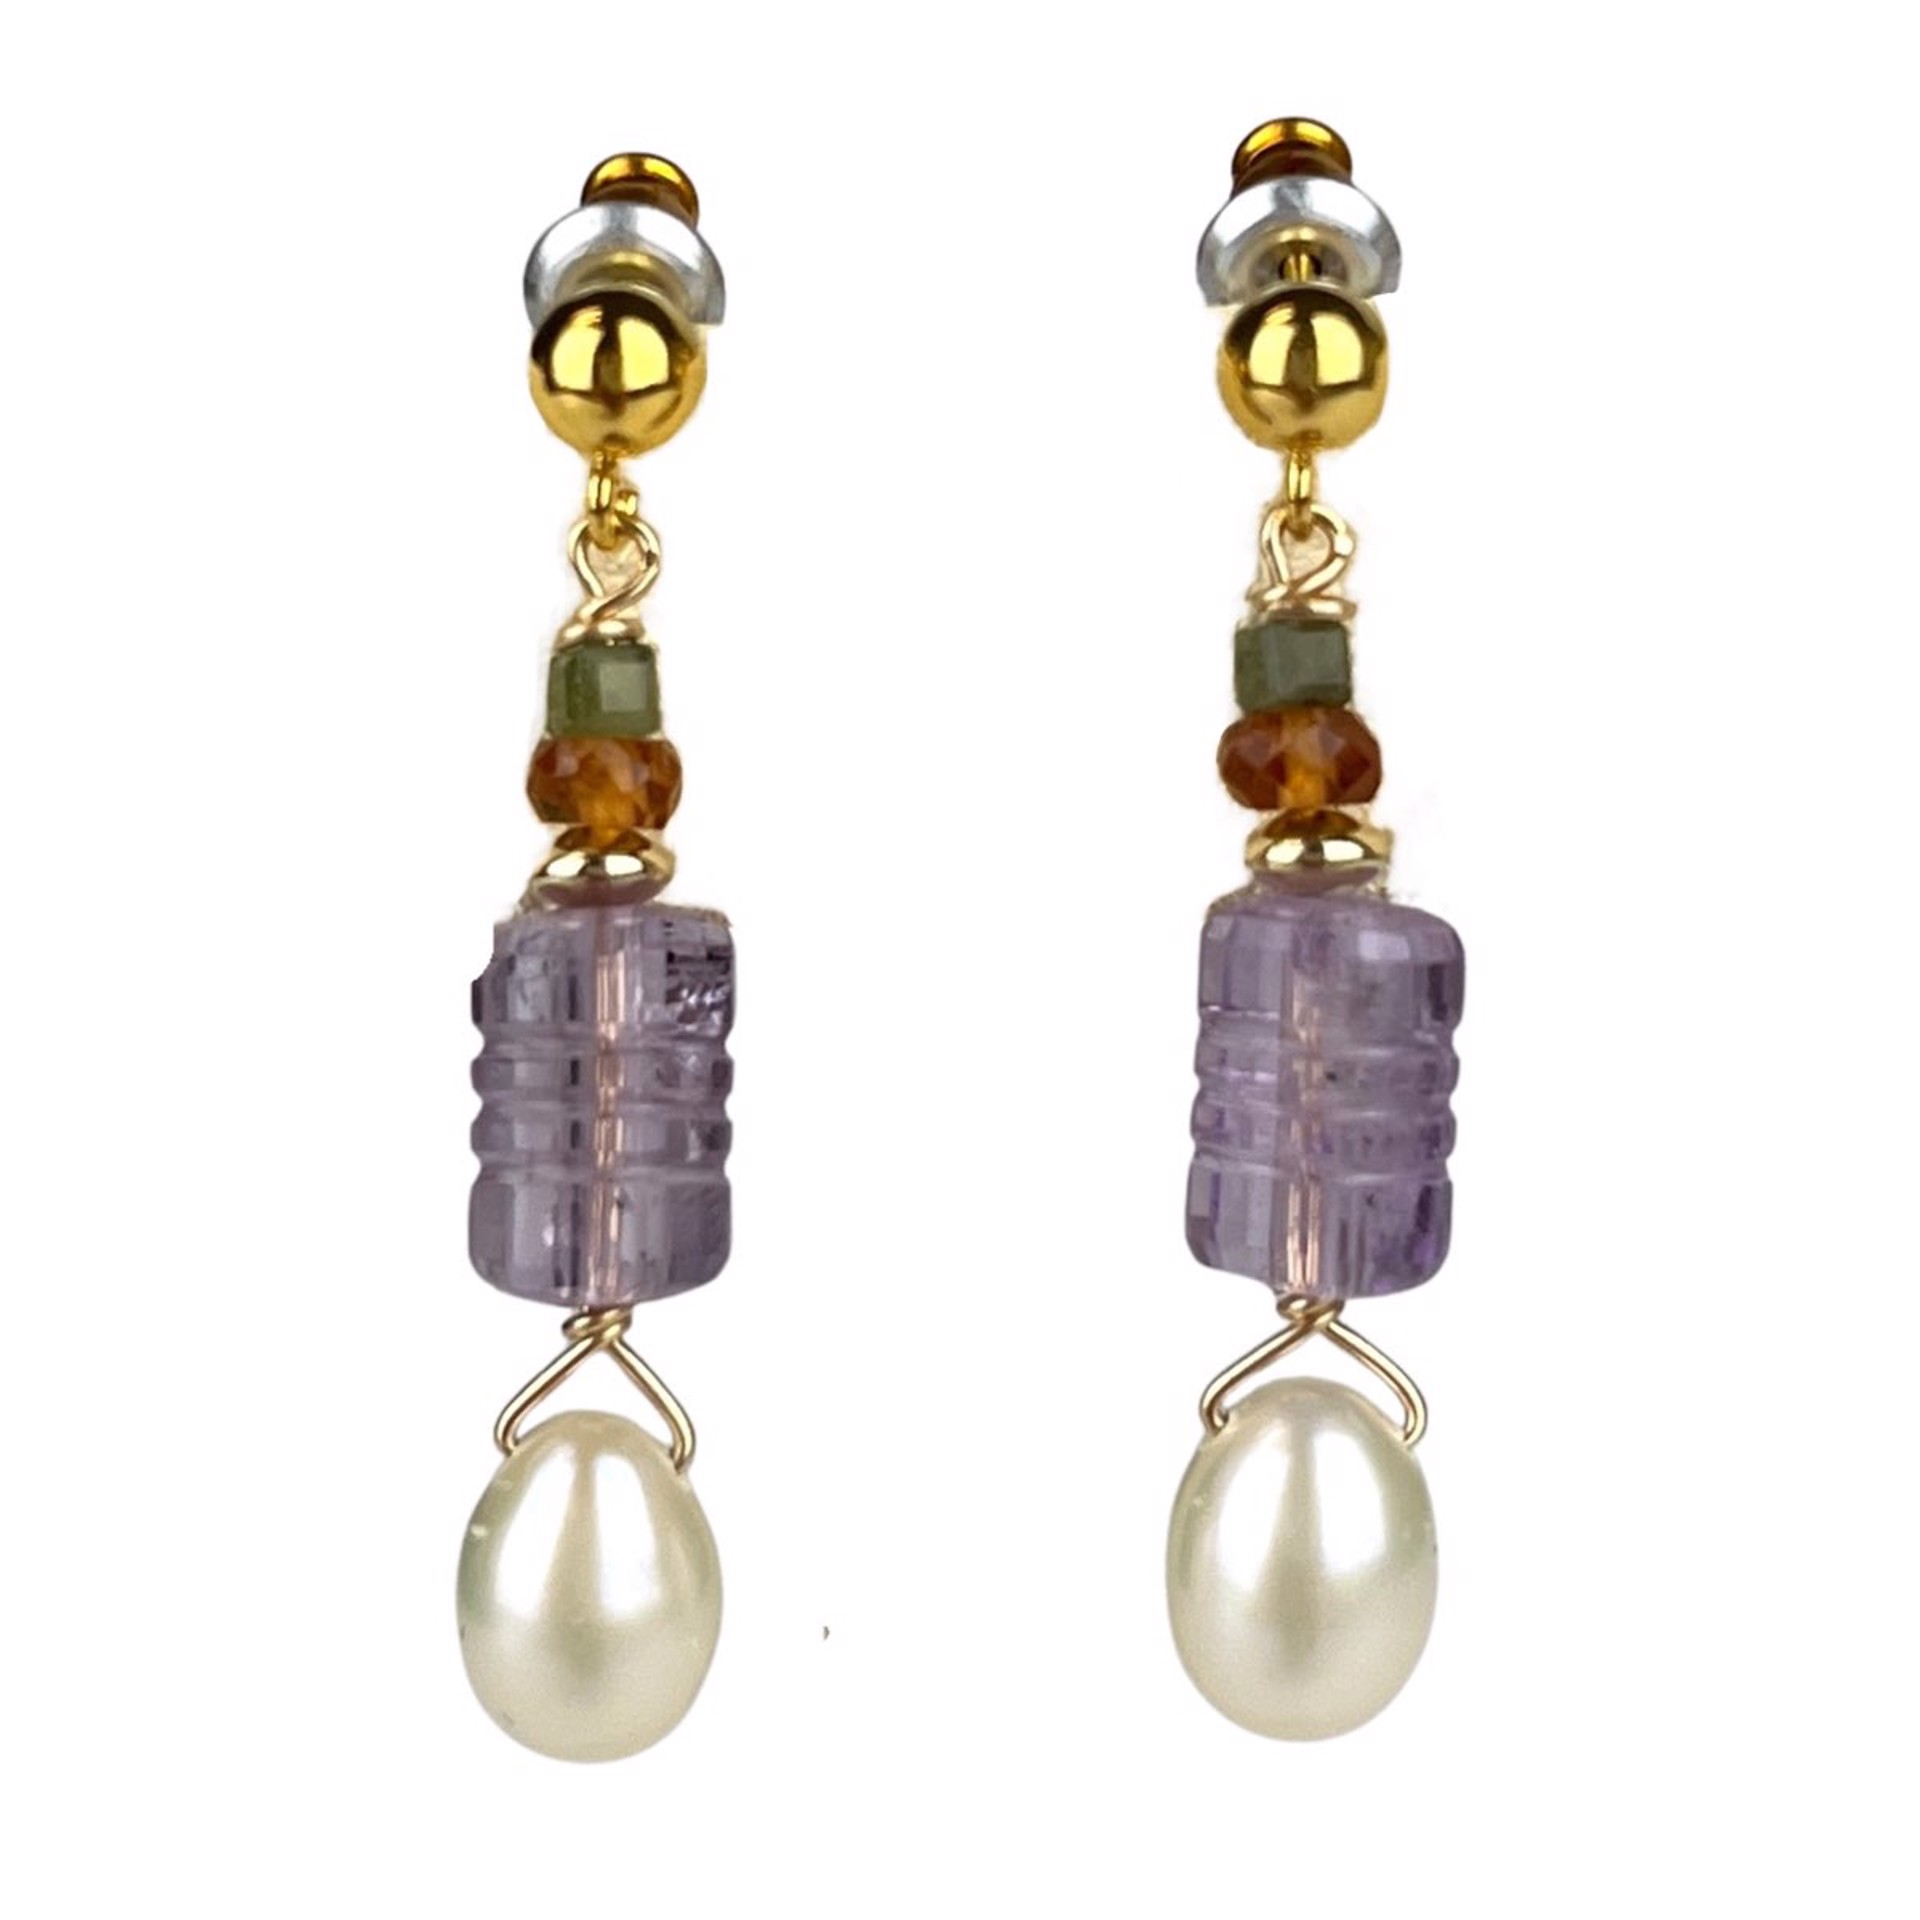 Faceted Amethyst with Pearl & Flourite 14K GF Earrings by Nola Smodic